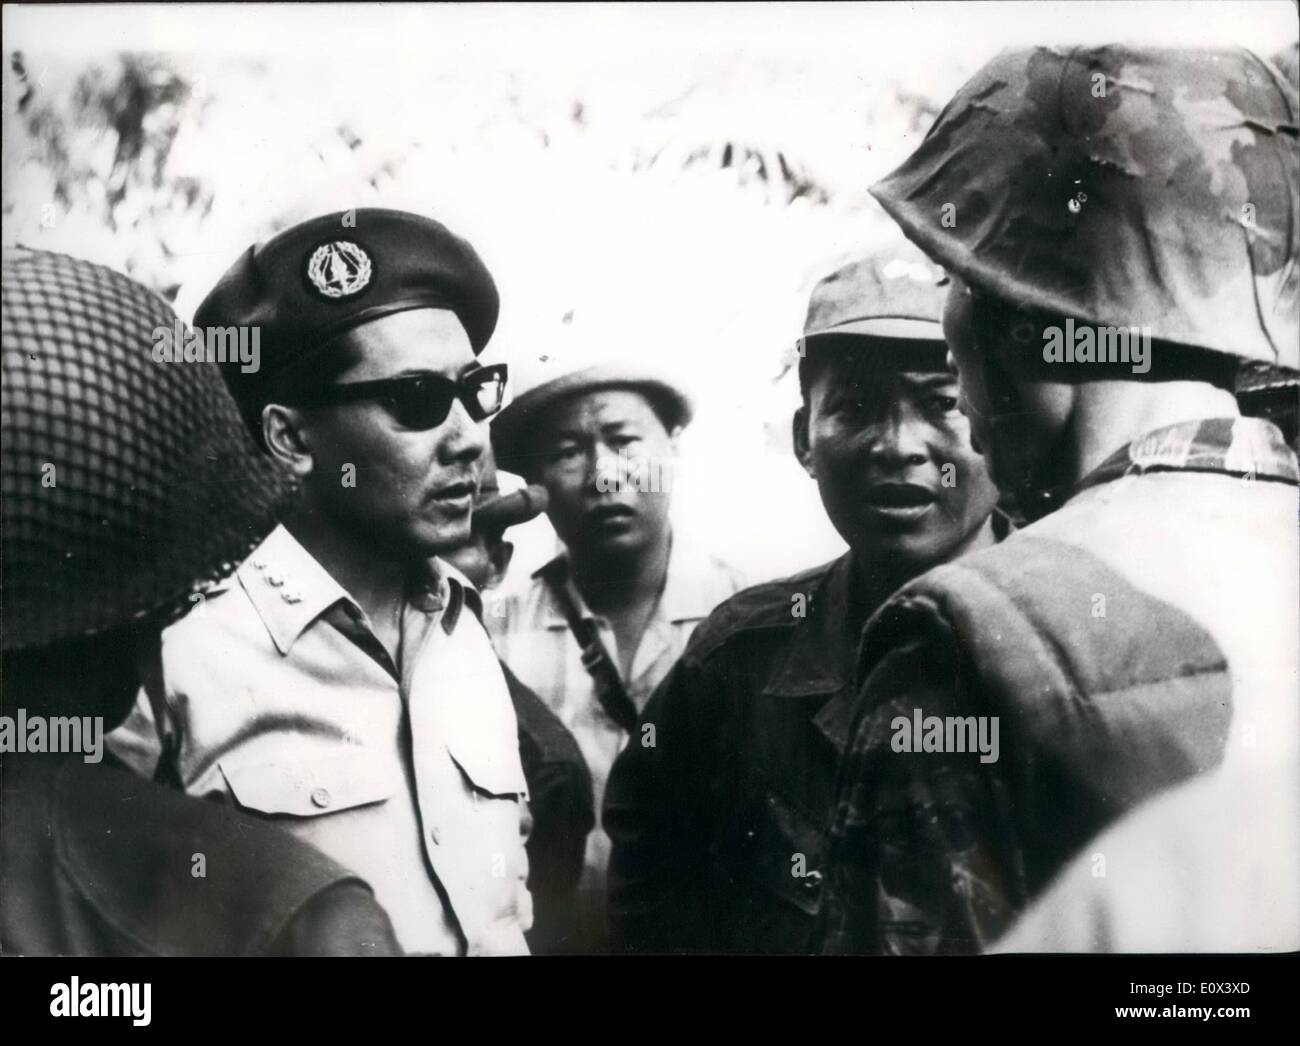 Feb. 02, 1965 - SOUTH VIETNAM'S PREMIERE WAS WE WANT TO END THE WAR .. ATTEMPTED COUP TO OVERTHROW GENERAL KHANH IN SAIGON: According to the latest reports from Saigon - Dr. Phan Huy Quat the Prime Minister of South Vietnam said that his country was suffering too much - and We want to end the war with honour .. This was said at a ceremony at which LIEUT. GENERAL NGUYEN KHANH former chief of the armed forces - turned over his command to Major General Tran Van Minh. Earlier Military faction led by former Brig. Gen. Lam Van Phat and Col Stock Photo